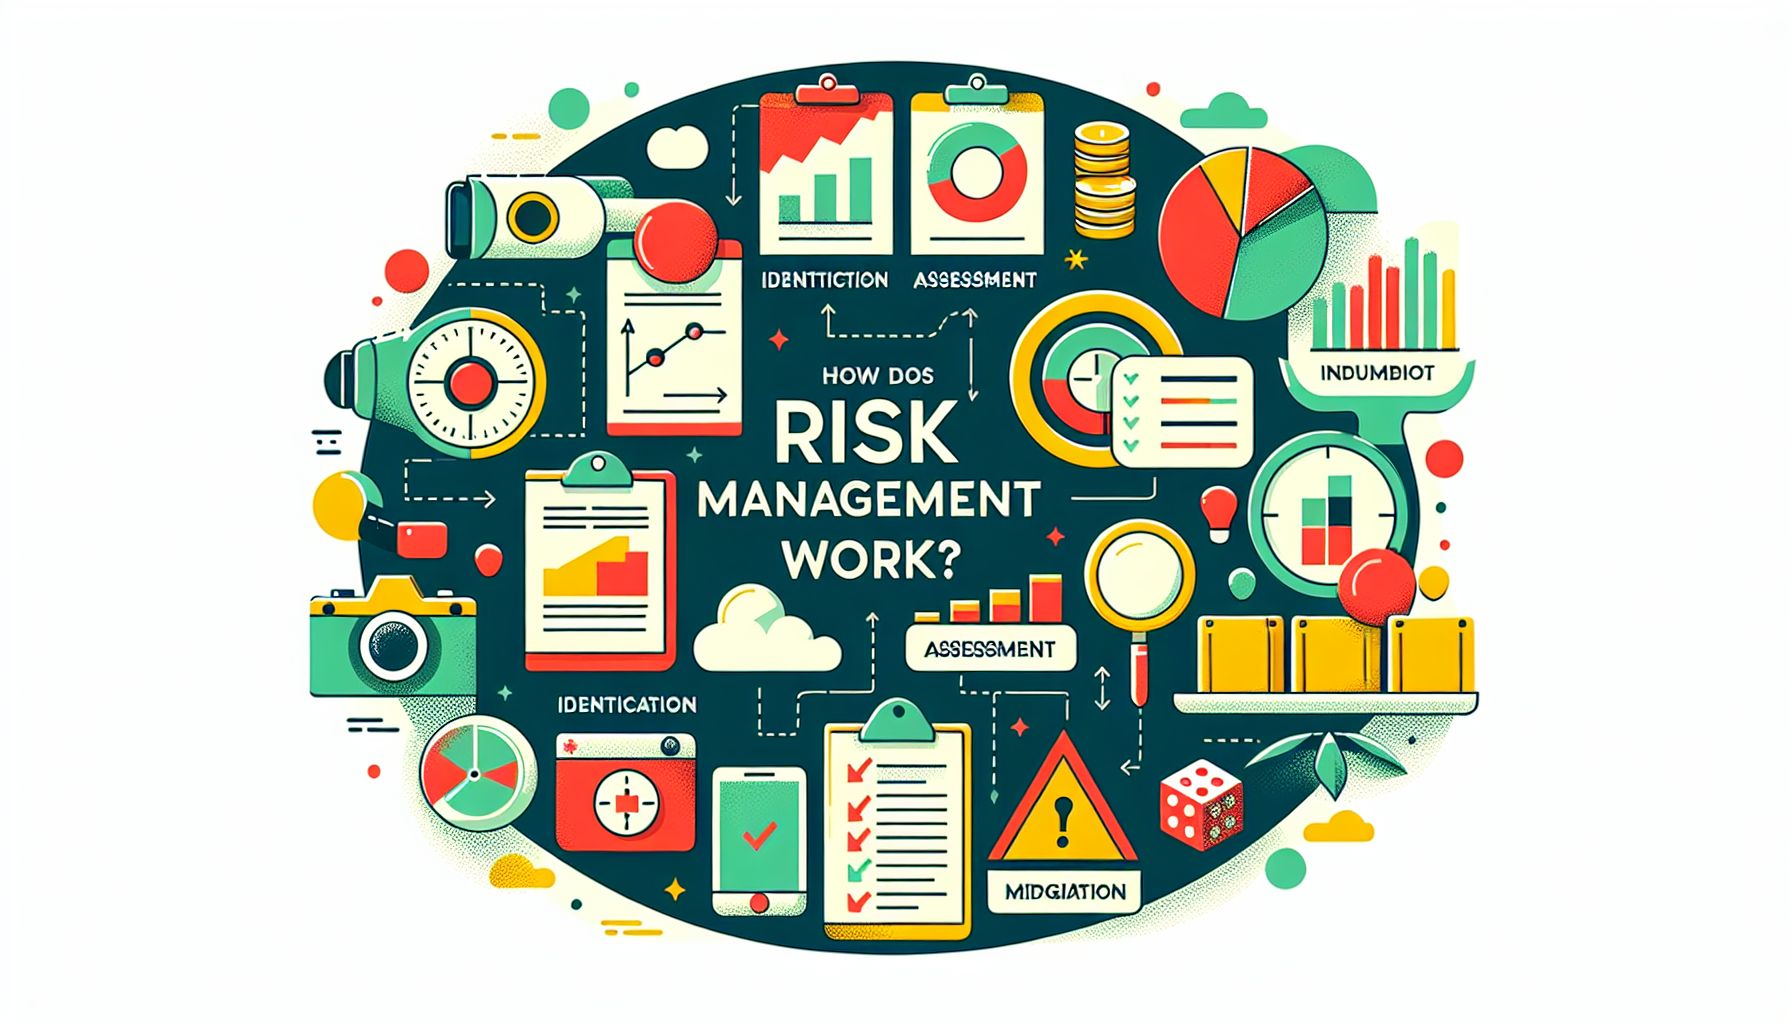 How does risk management work? in flat illustration style and white background, red #f47574, green #88c7a8, yellow #fcc44b, and blue #645bc8 colors.